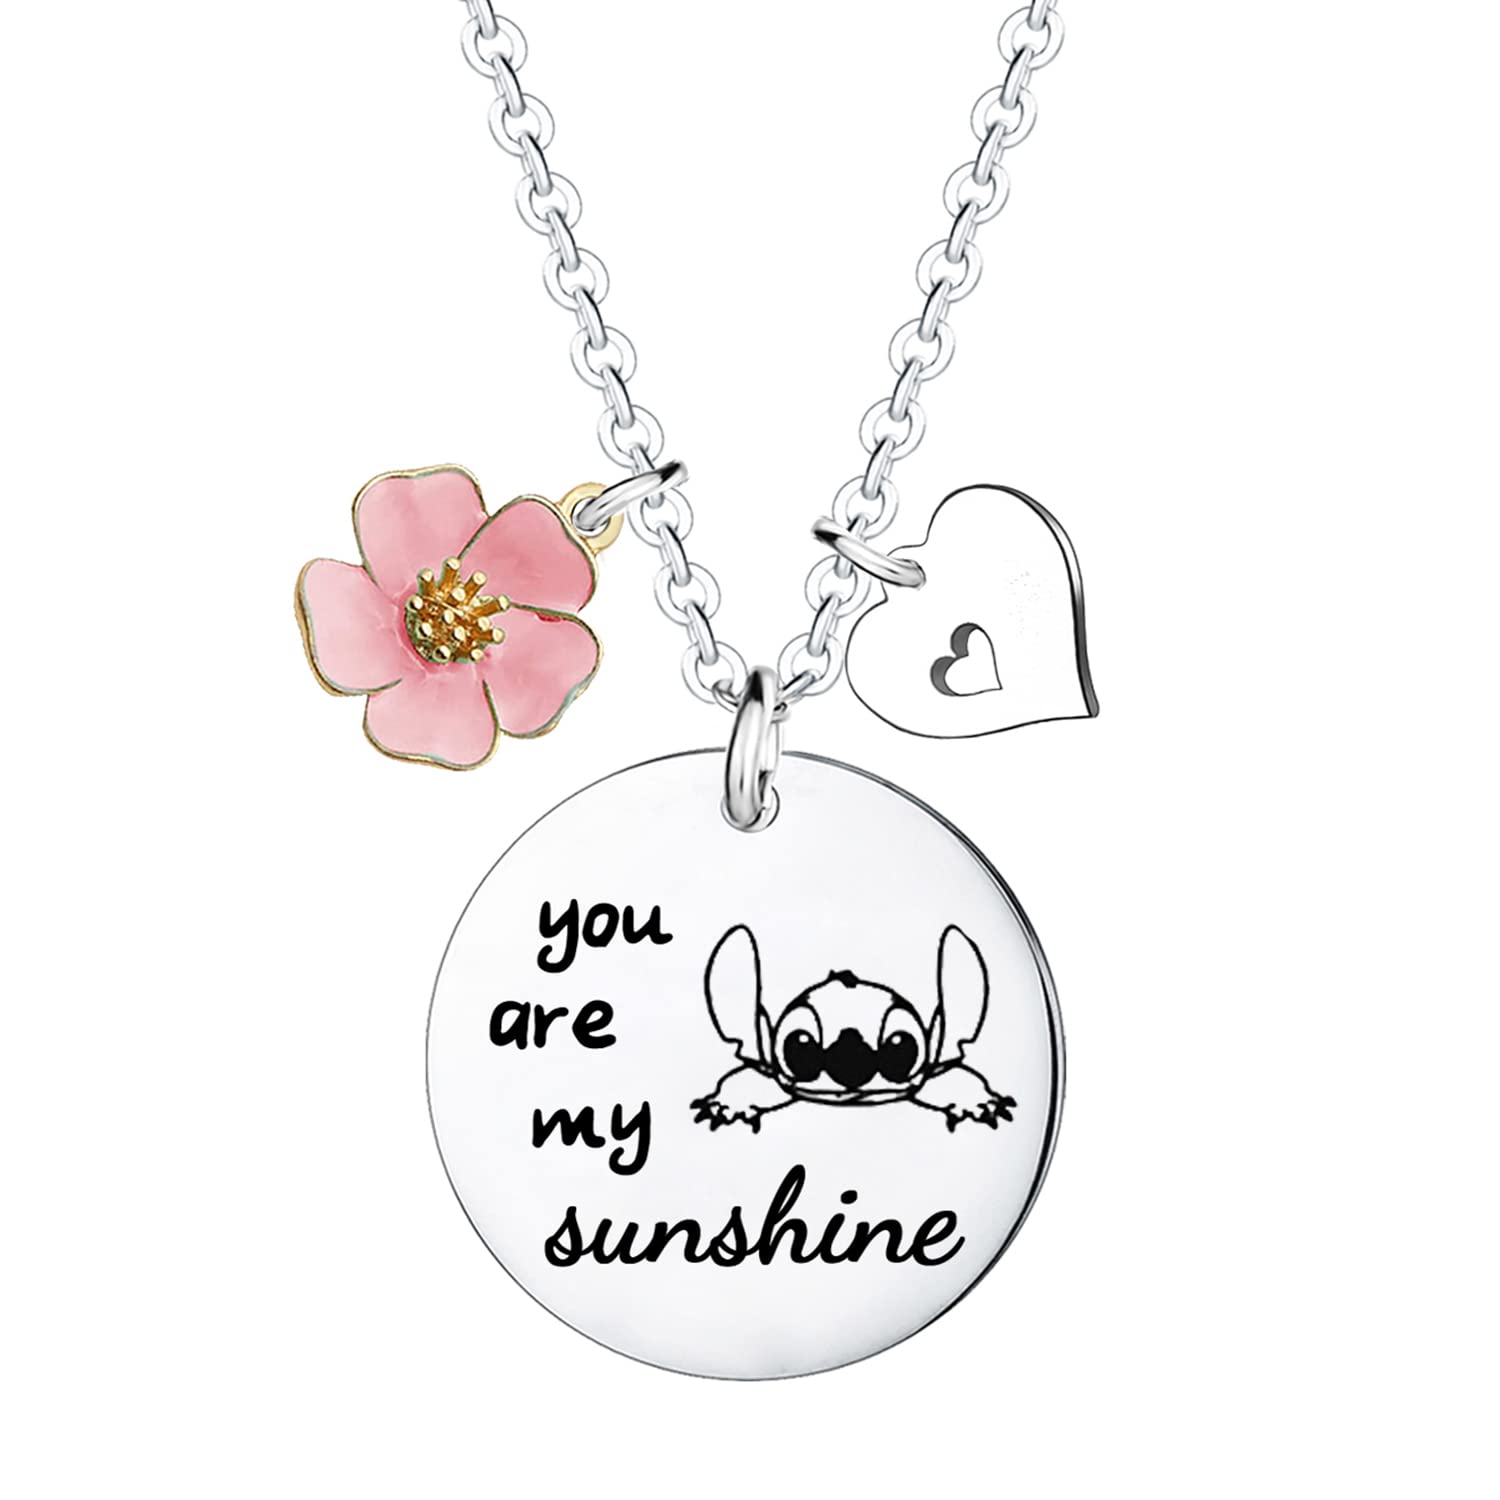 Girl's Necklace Jewellery You are My Sunshine Pendant Necklace Chain Gift for Daughter, Niece, Girls Stitch Gifts Cute Necklaces for Bff Women Friendship Birthday Gift